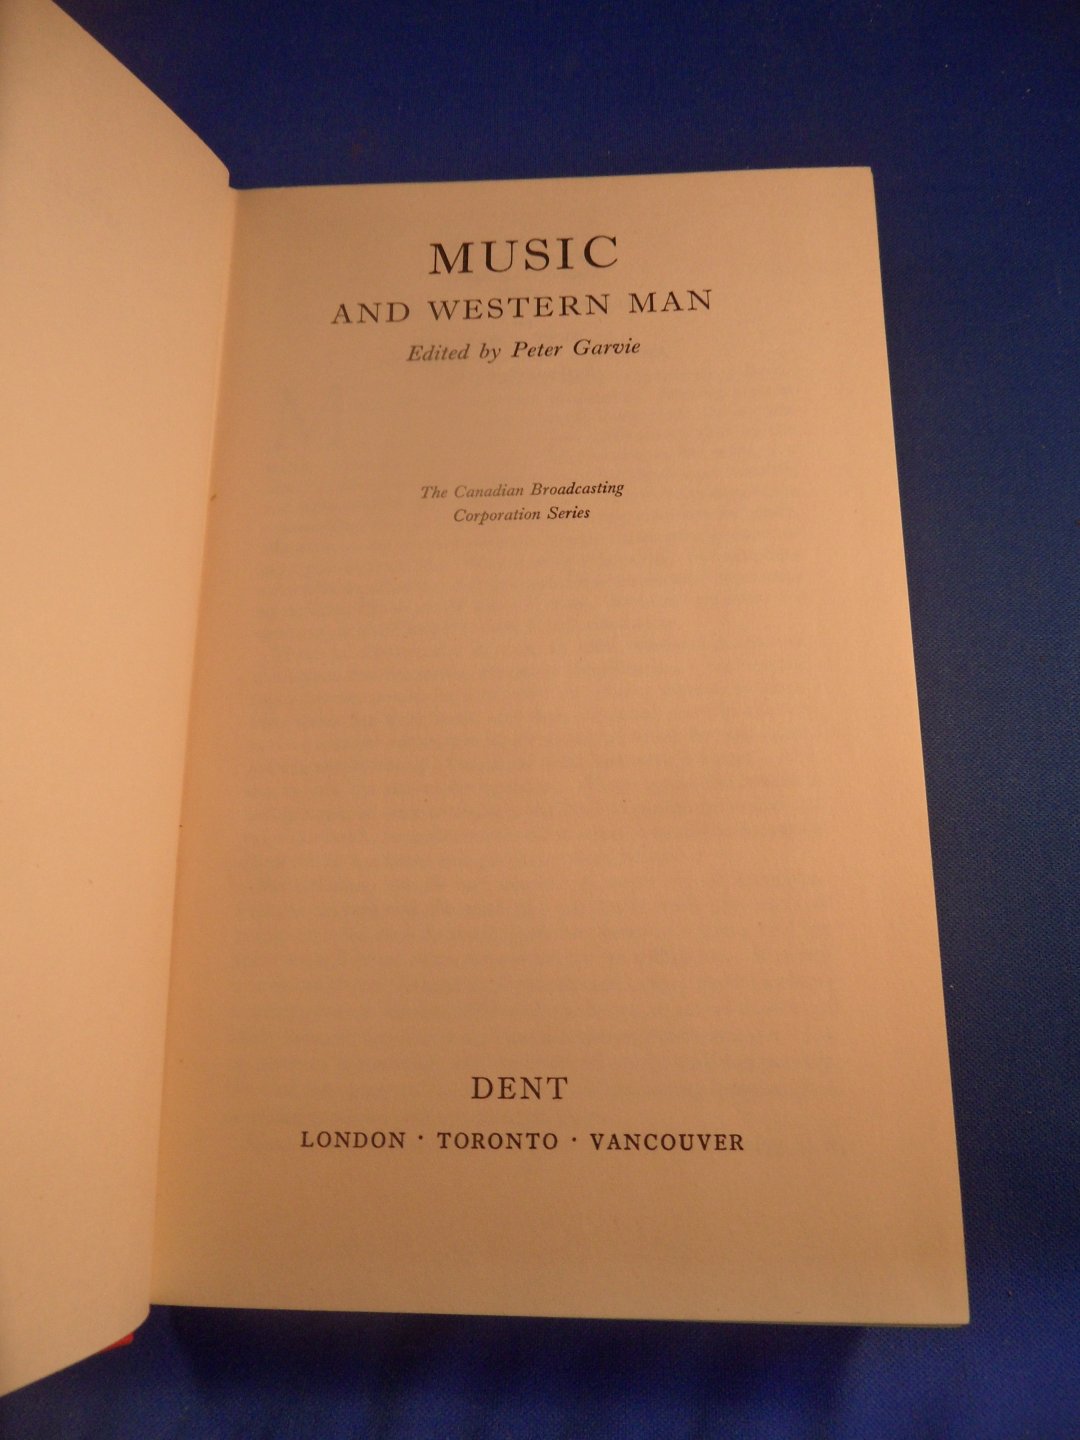 Garvie, Peter - Music and western man. The Canadian broadcasting Corporation Series